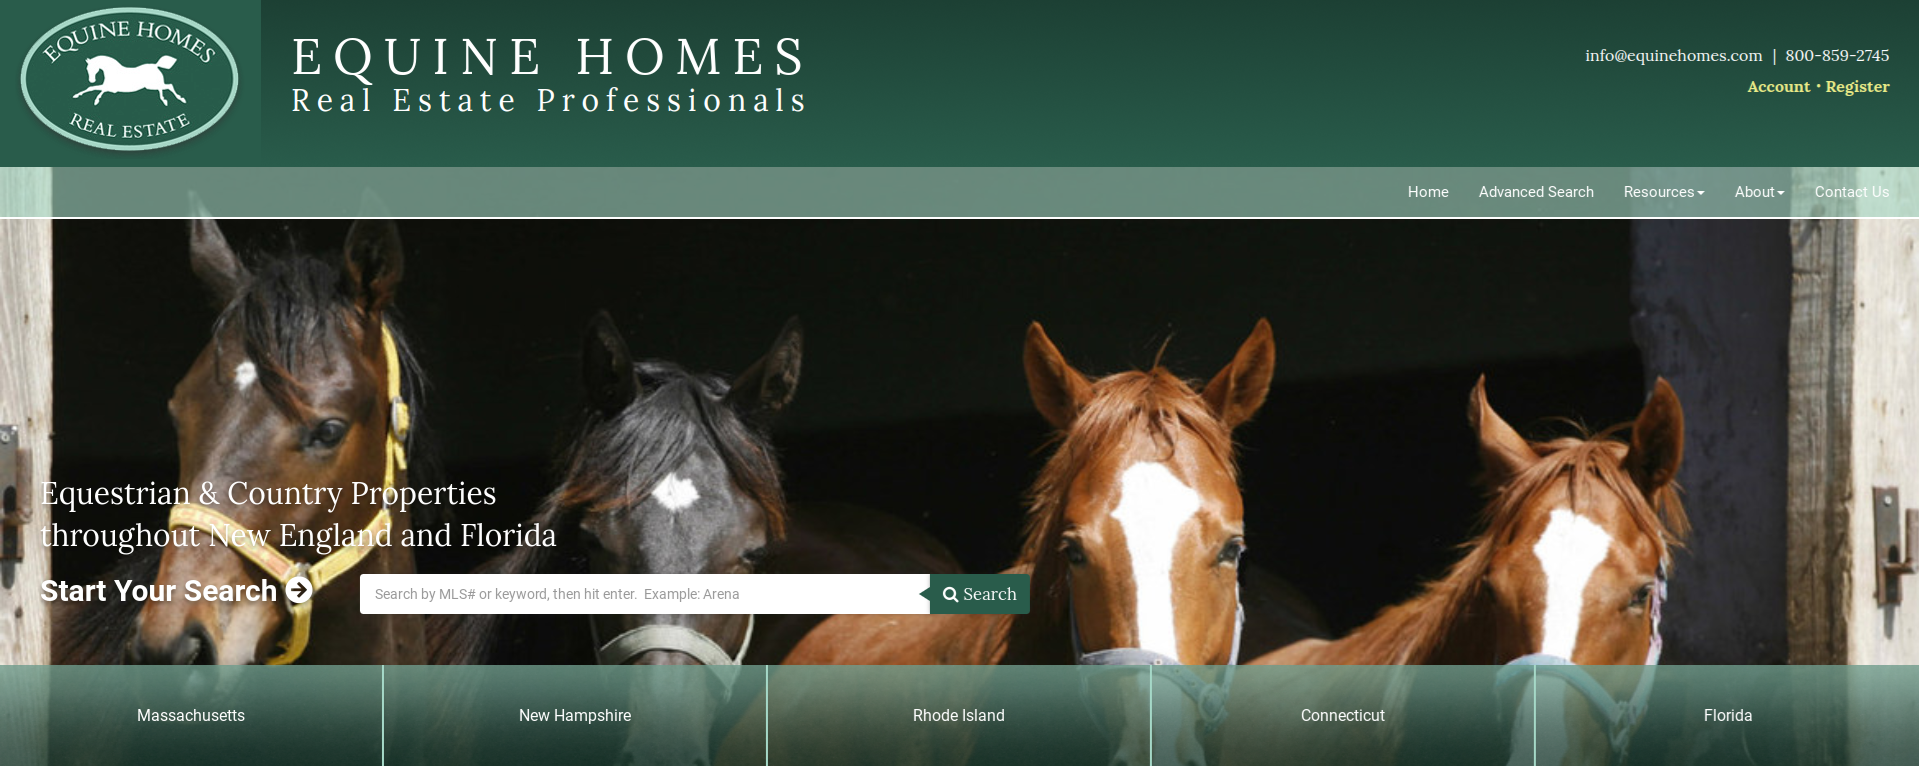 equine homes